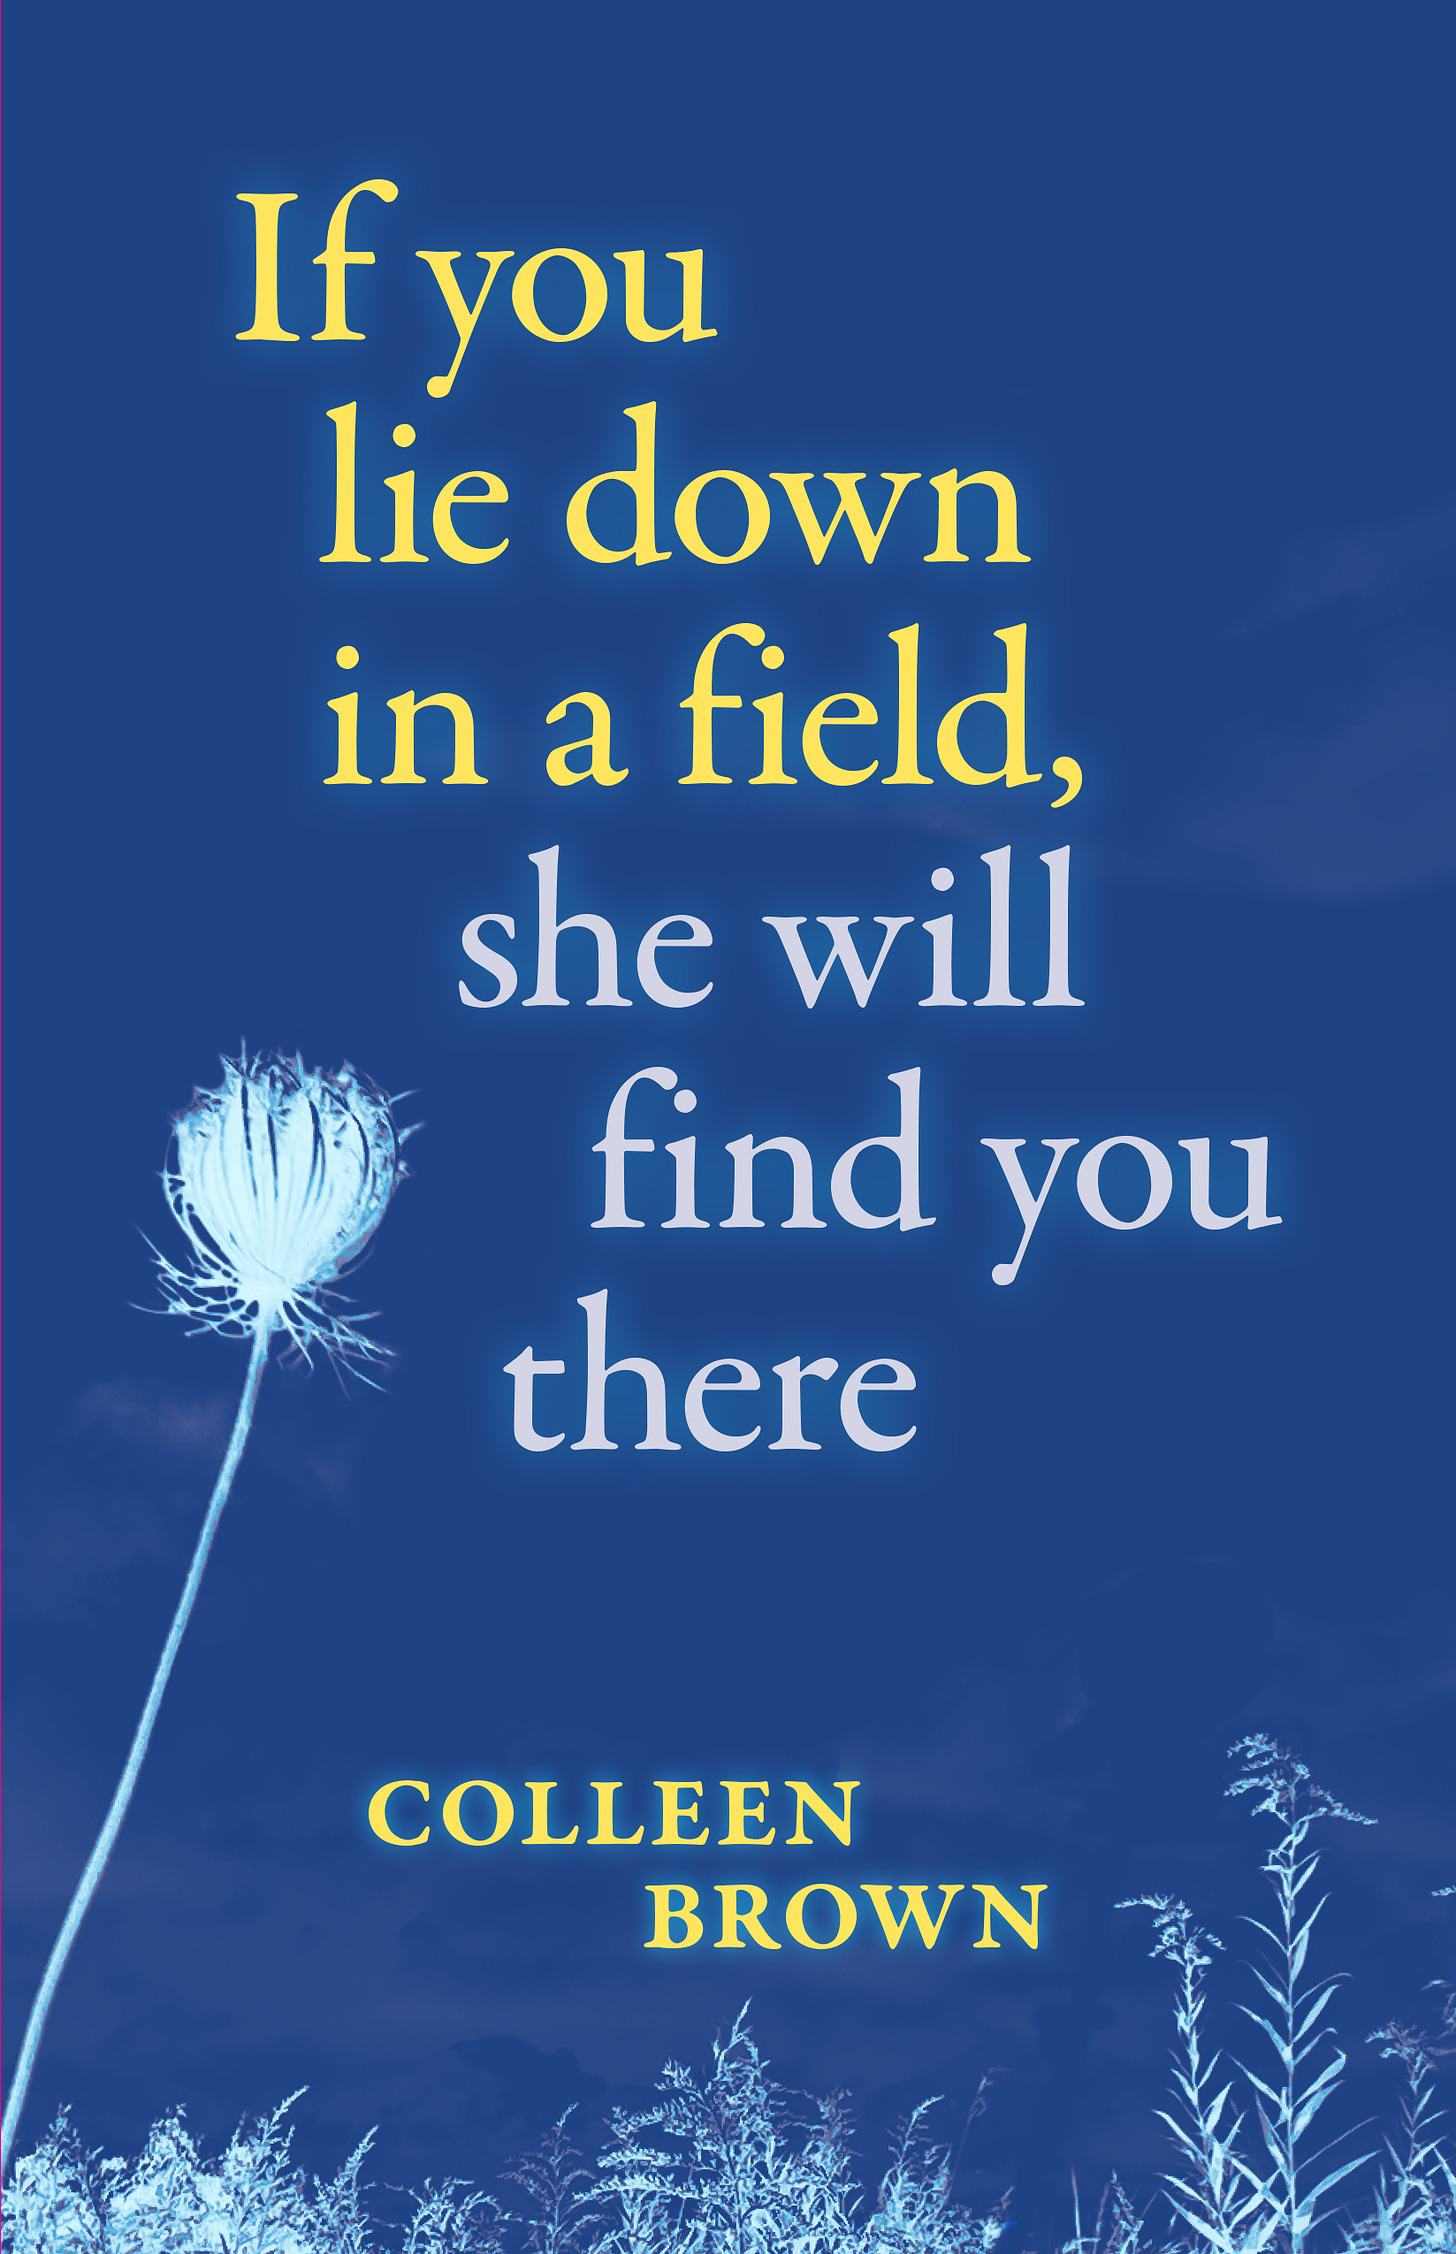 Book Cover If you lie down, she will find you